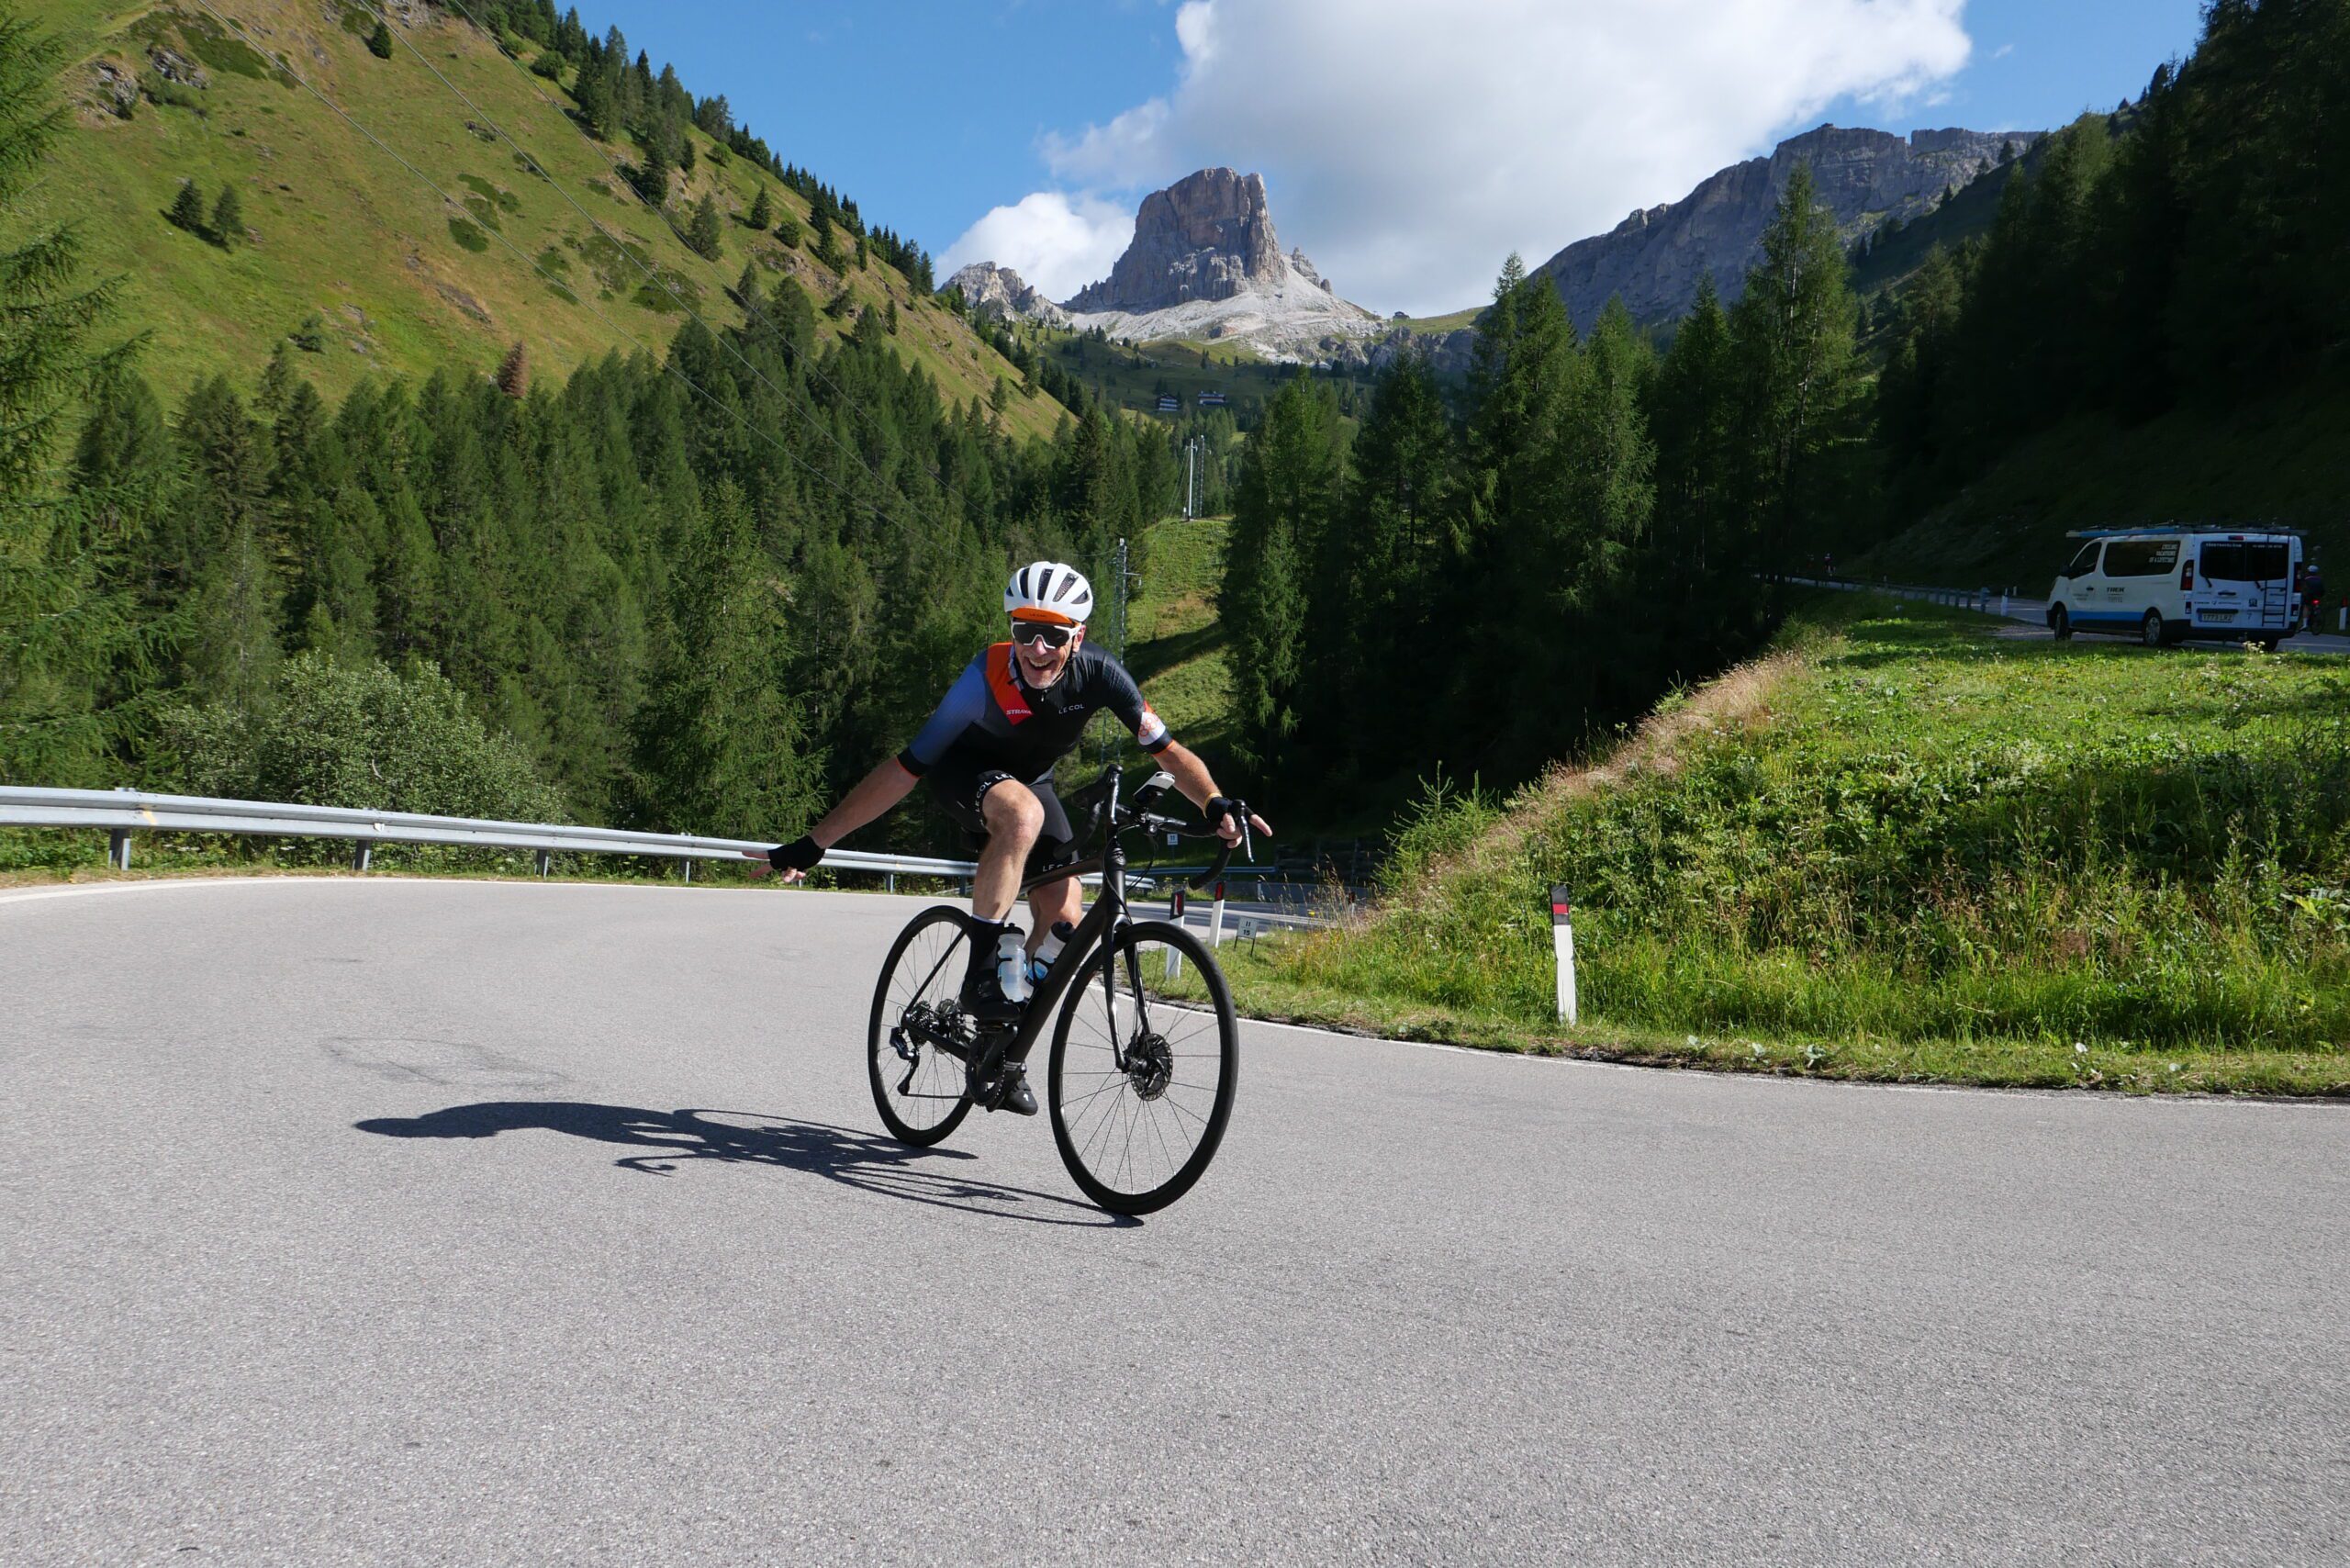 DL:riding in the Dolomites (up to Passo Giau)